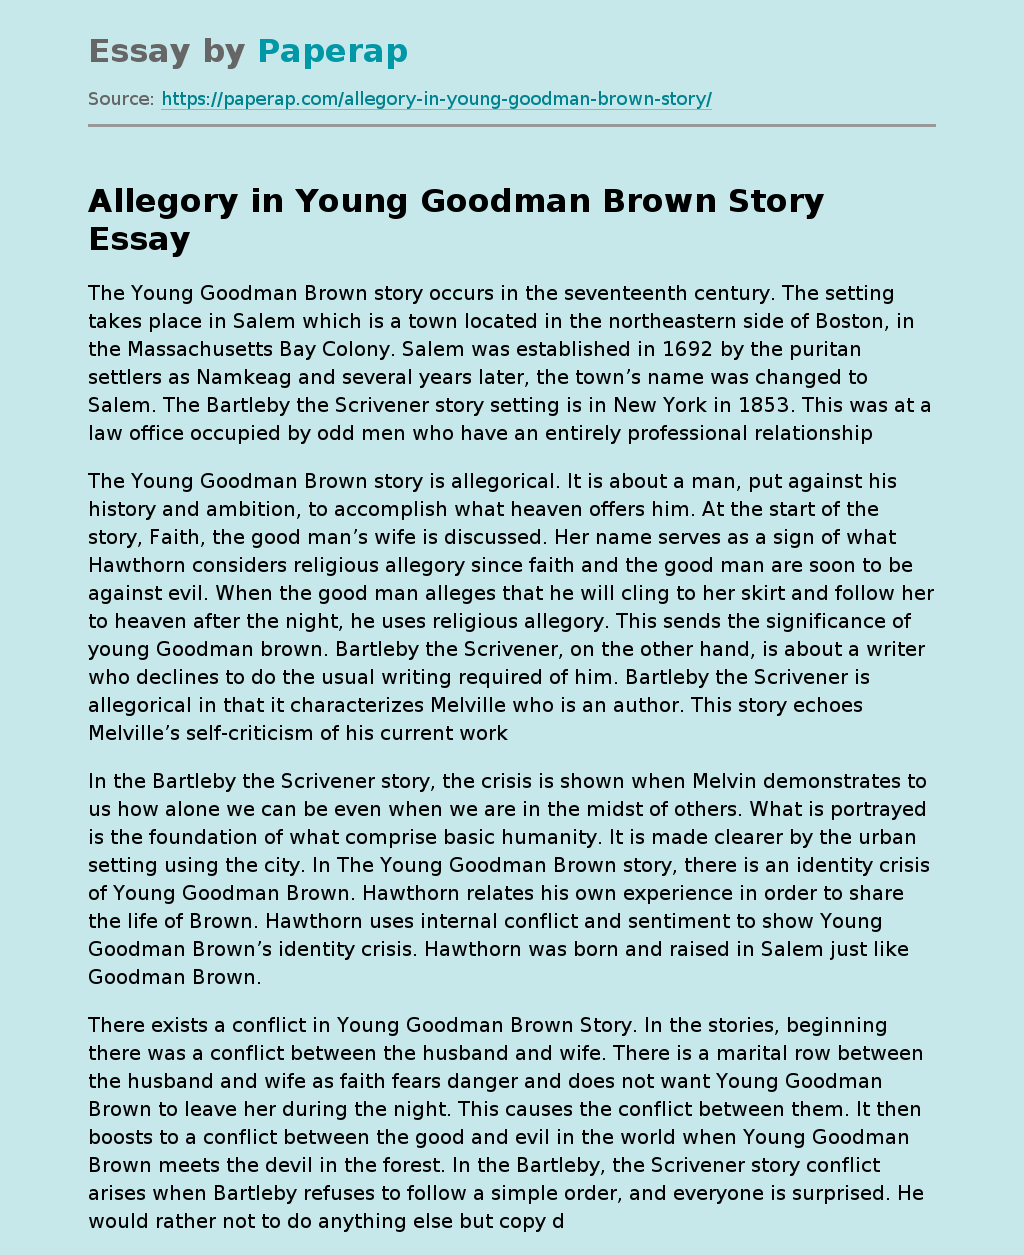 Allegory in Young Goodman Brown Story